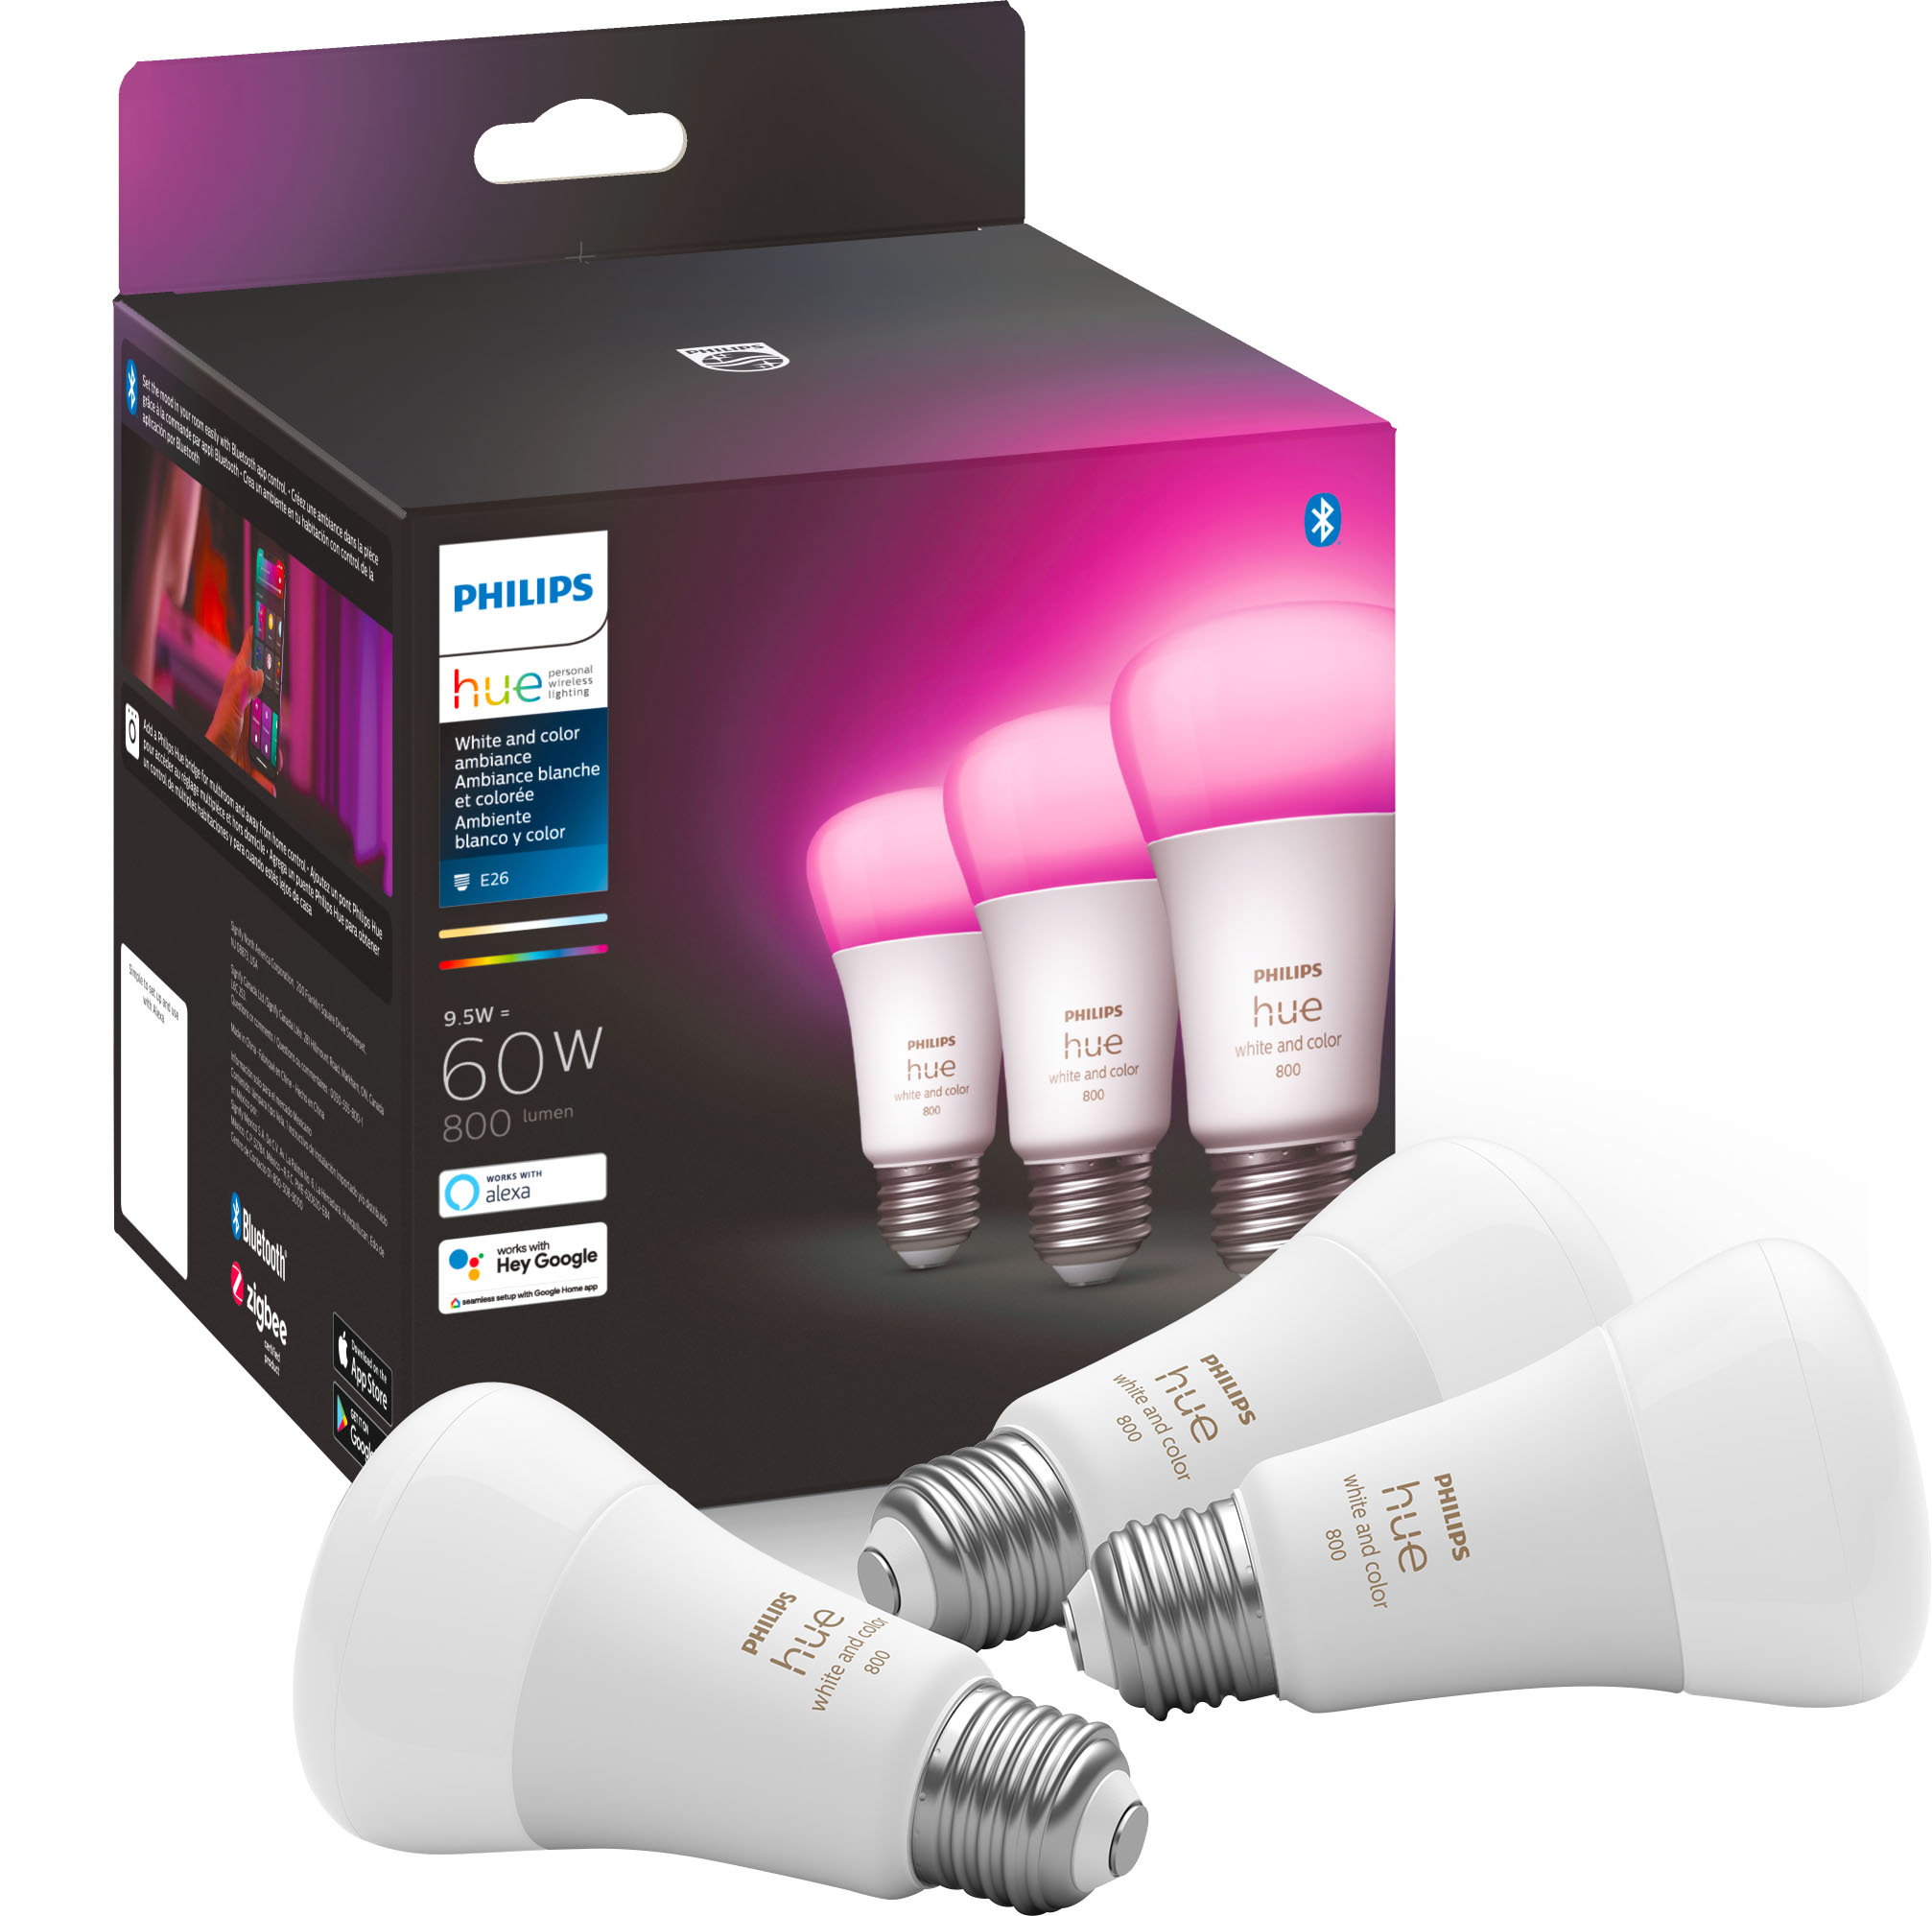 Dwell raid Bot Philips Hue White & Color Ambiance A19 Bluetooth LED Smart Bulbs (3-Pack)  Multicolor 562785 - Best Buy